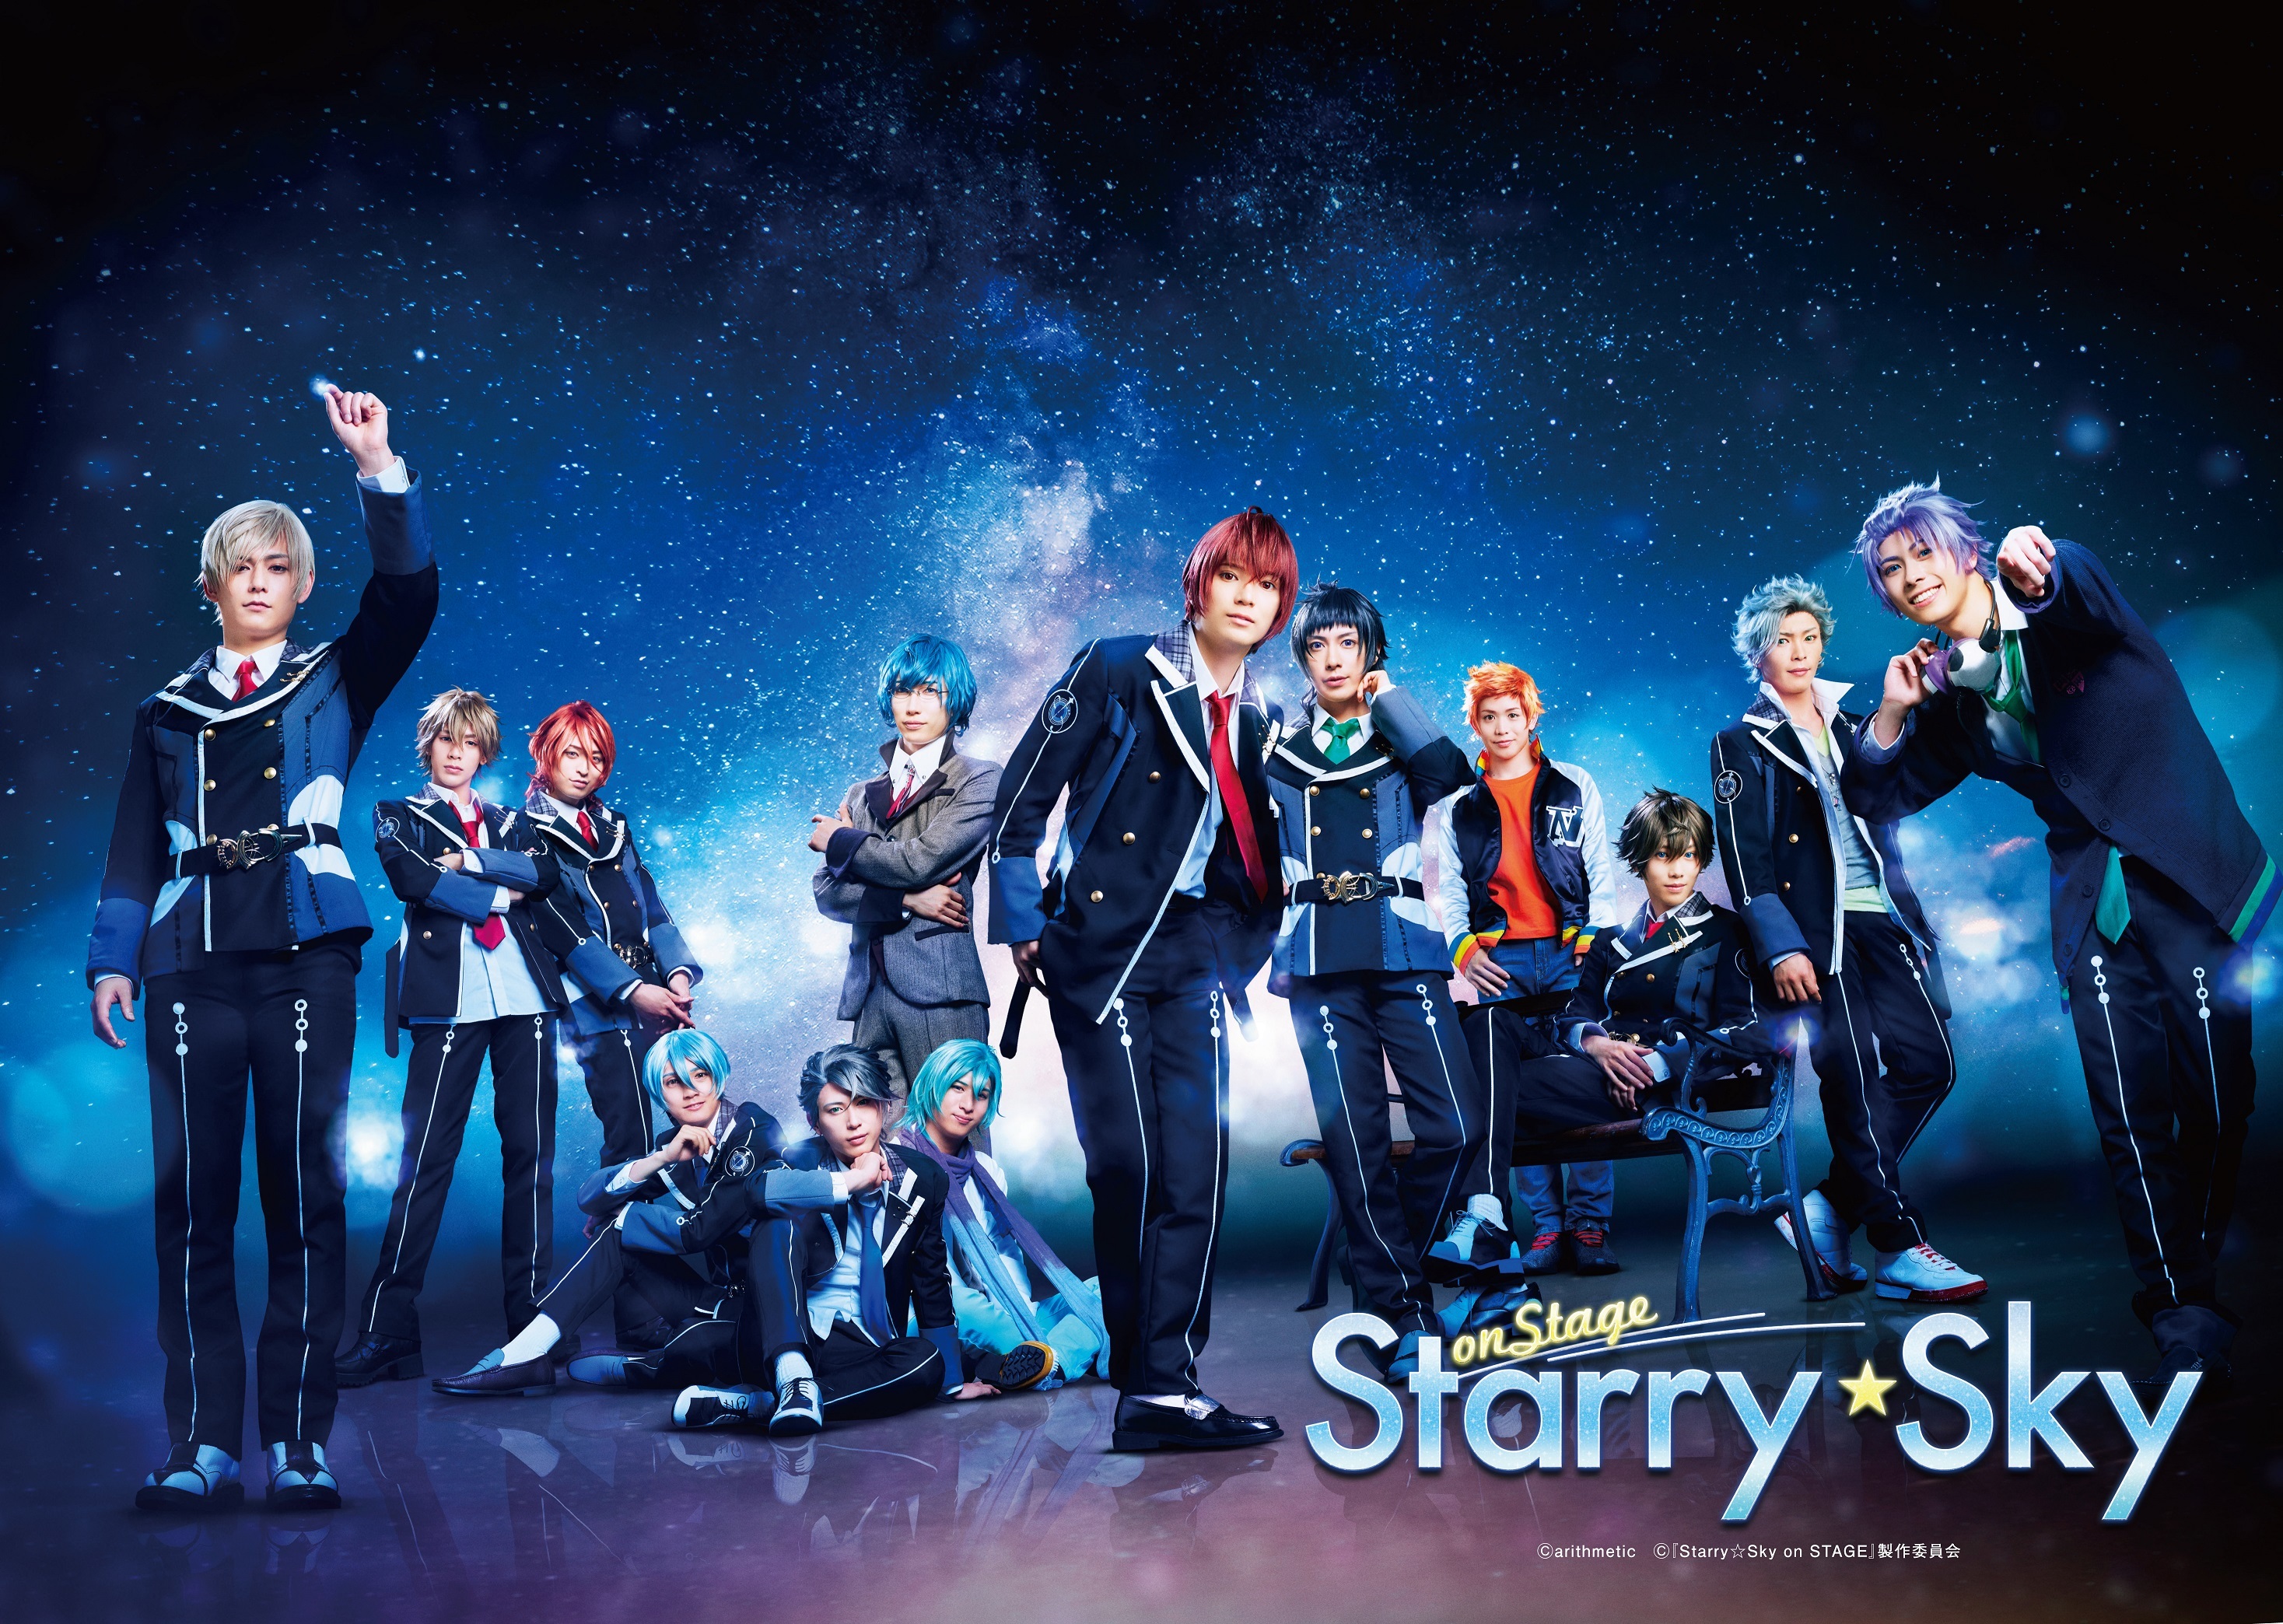  Ⓒarithmetic / Ⓒ『Starry☆Sky on STAGE』製作委員会